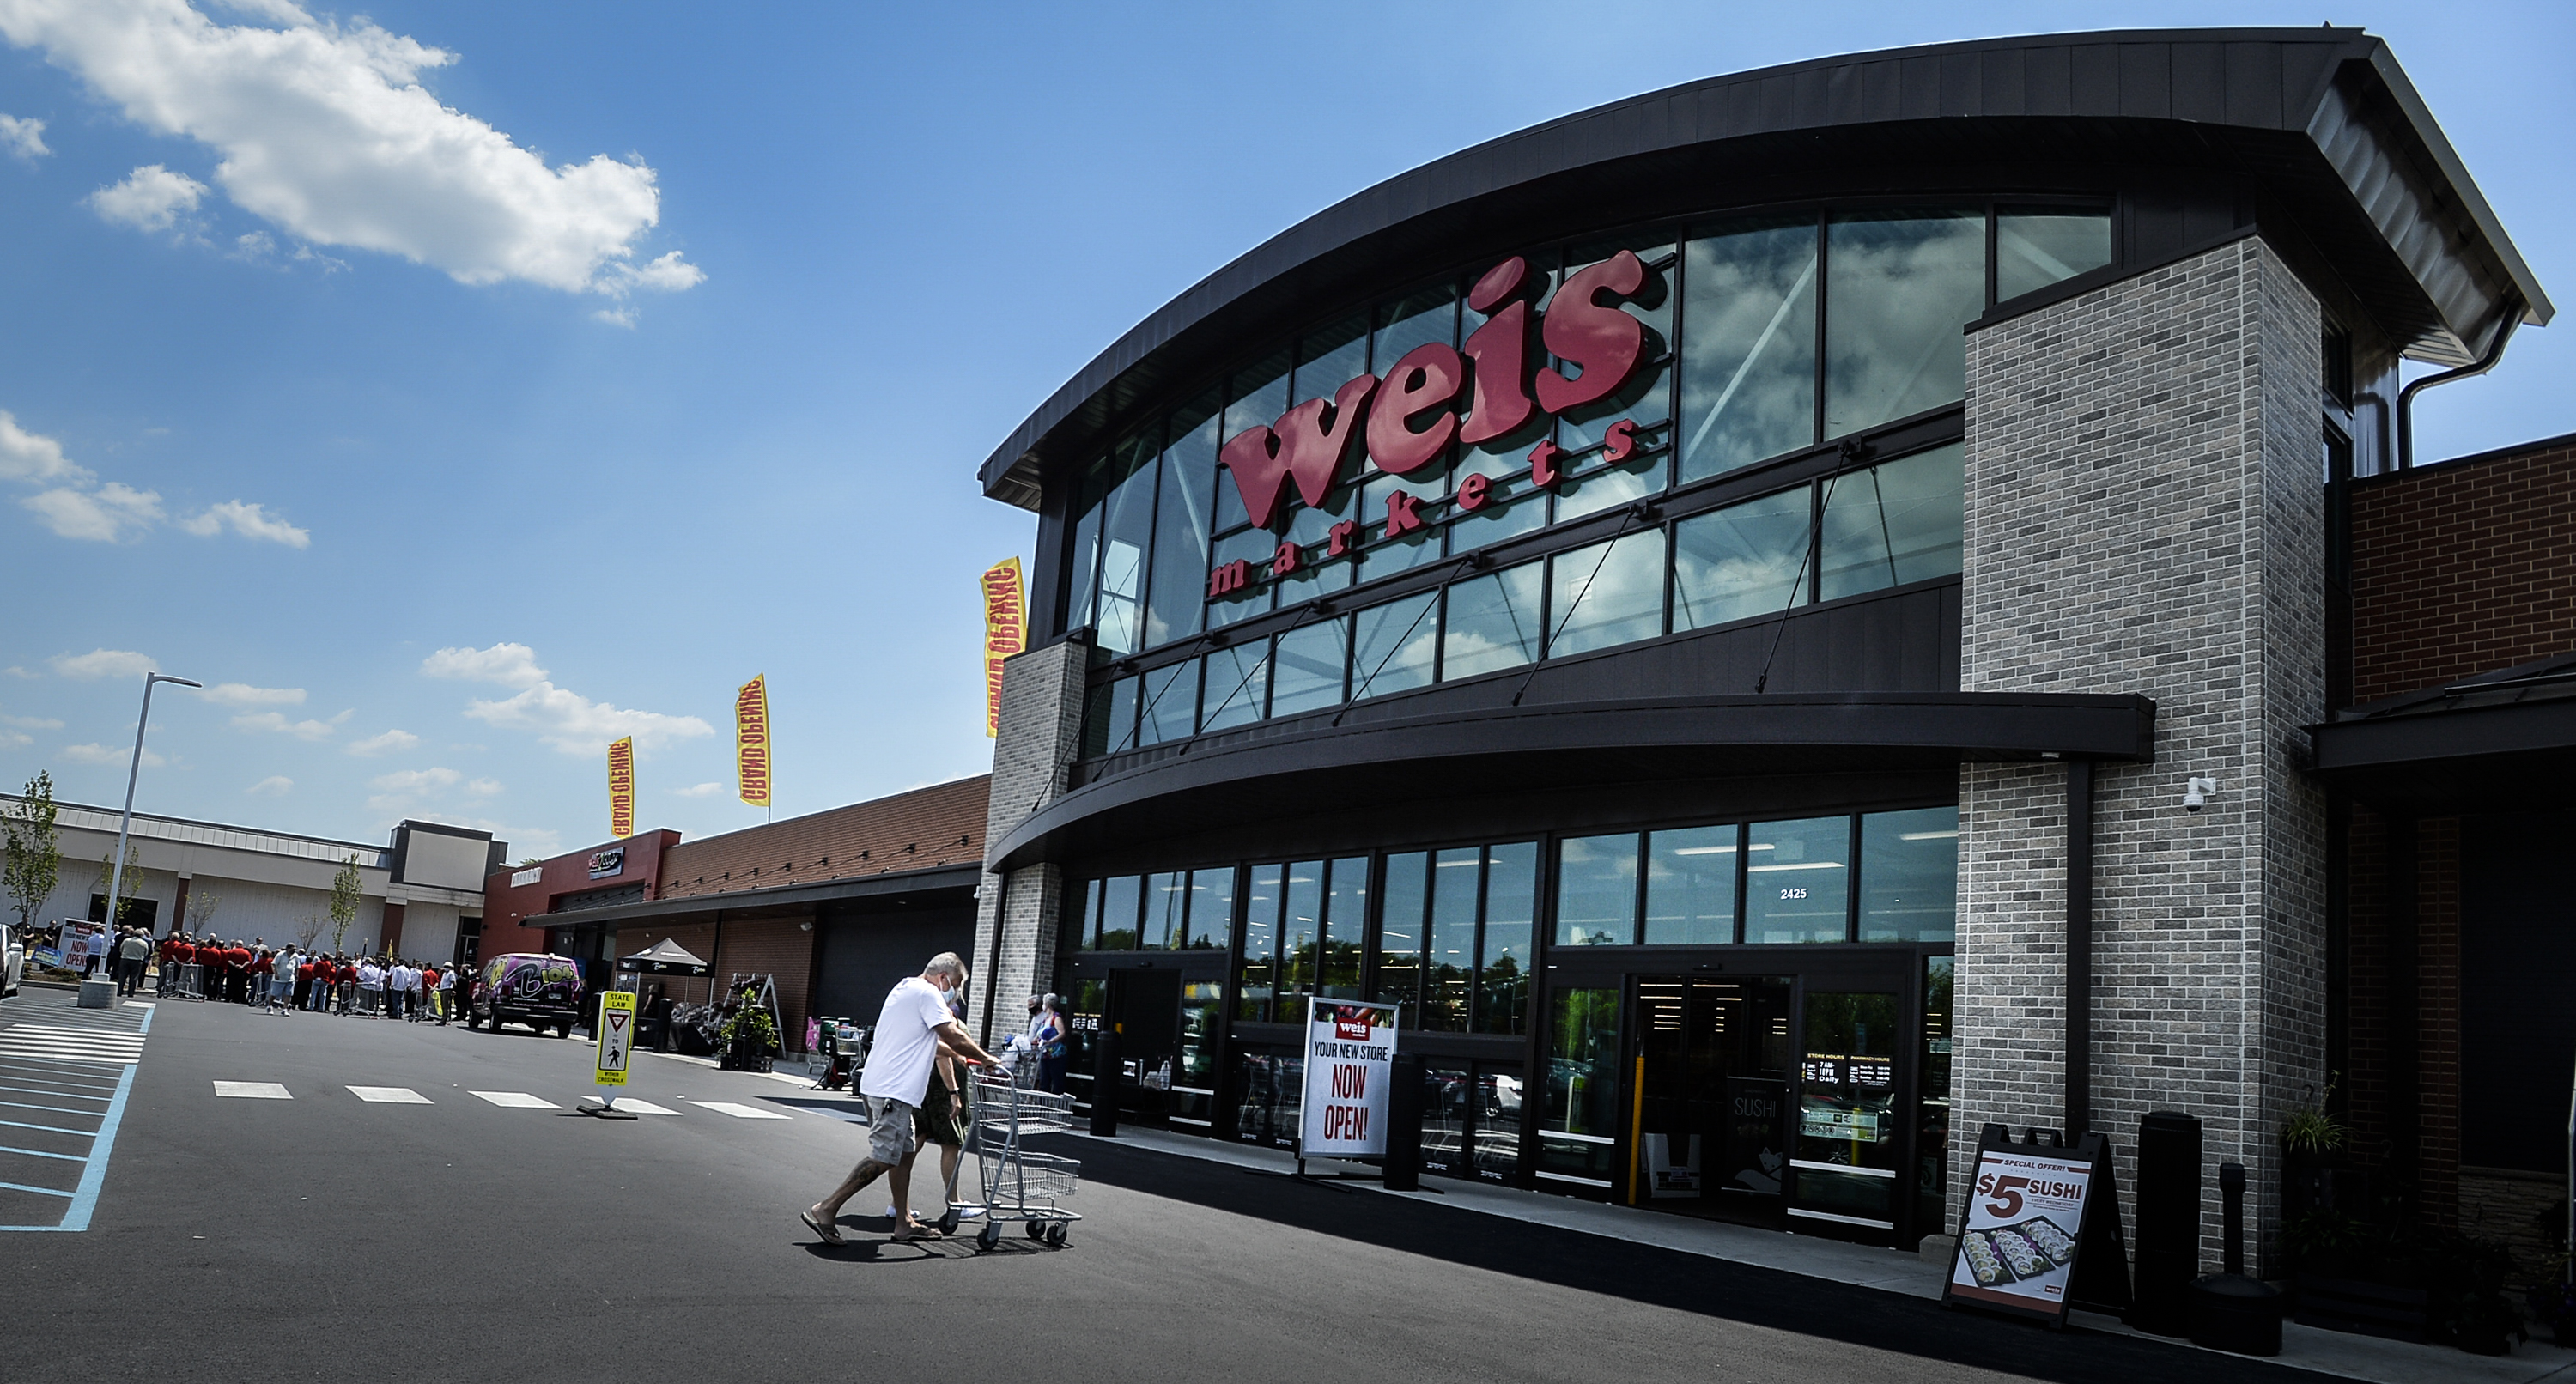 Weis Markets offering COVID-19 vaccines